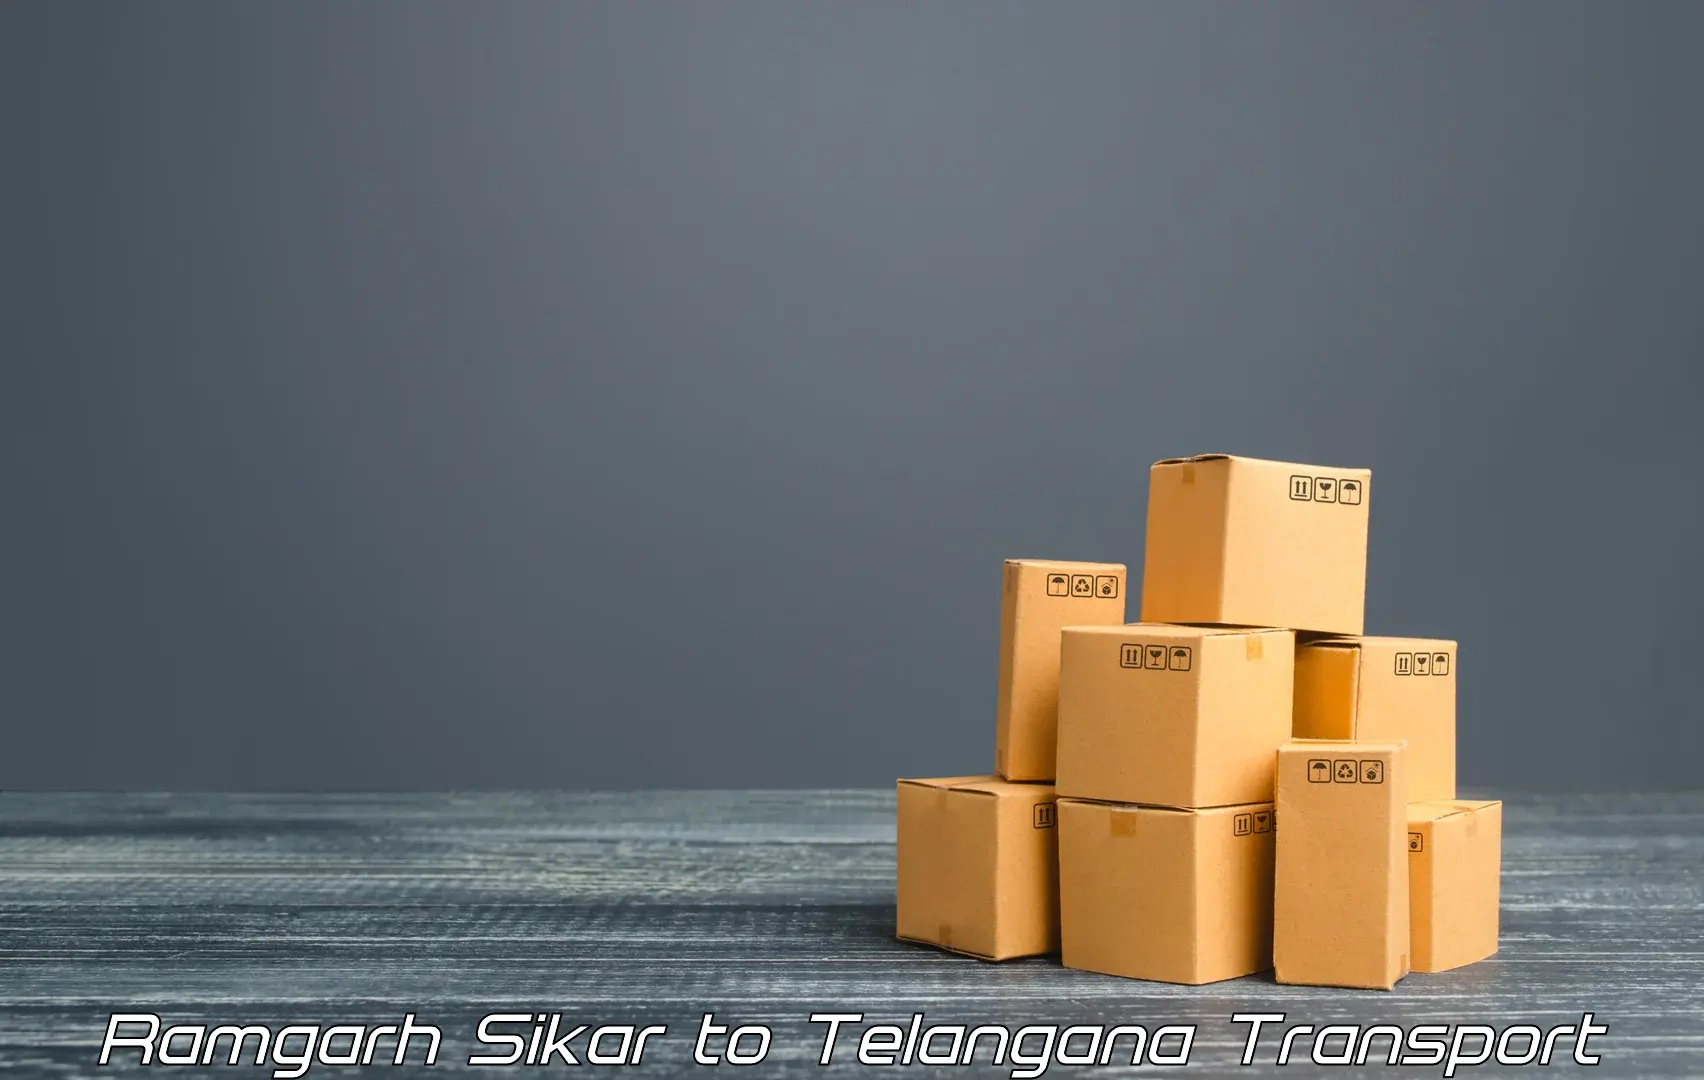 Truck transport companies in India Ramgarh Sikar to Bhainsa